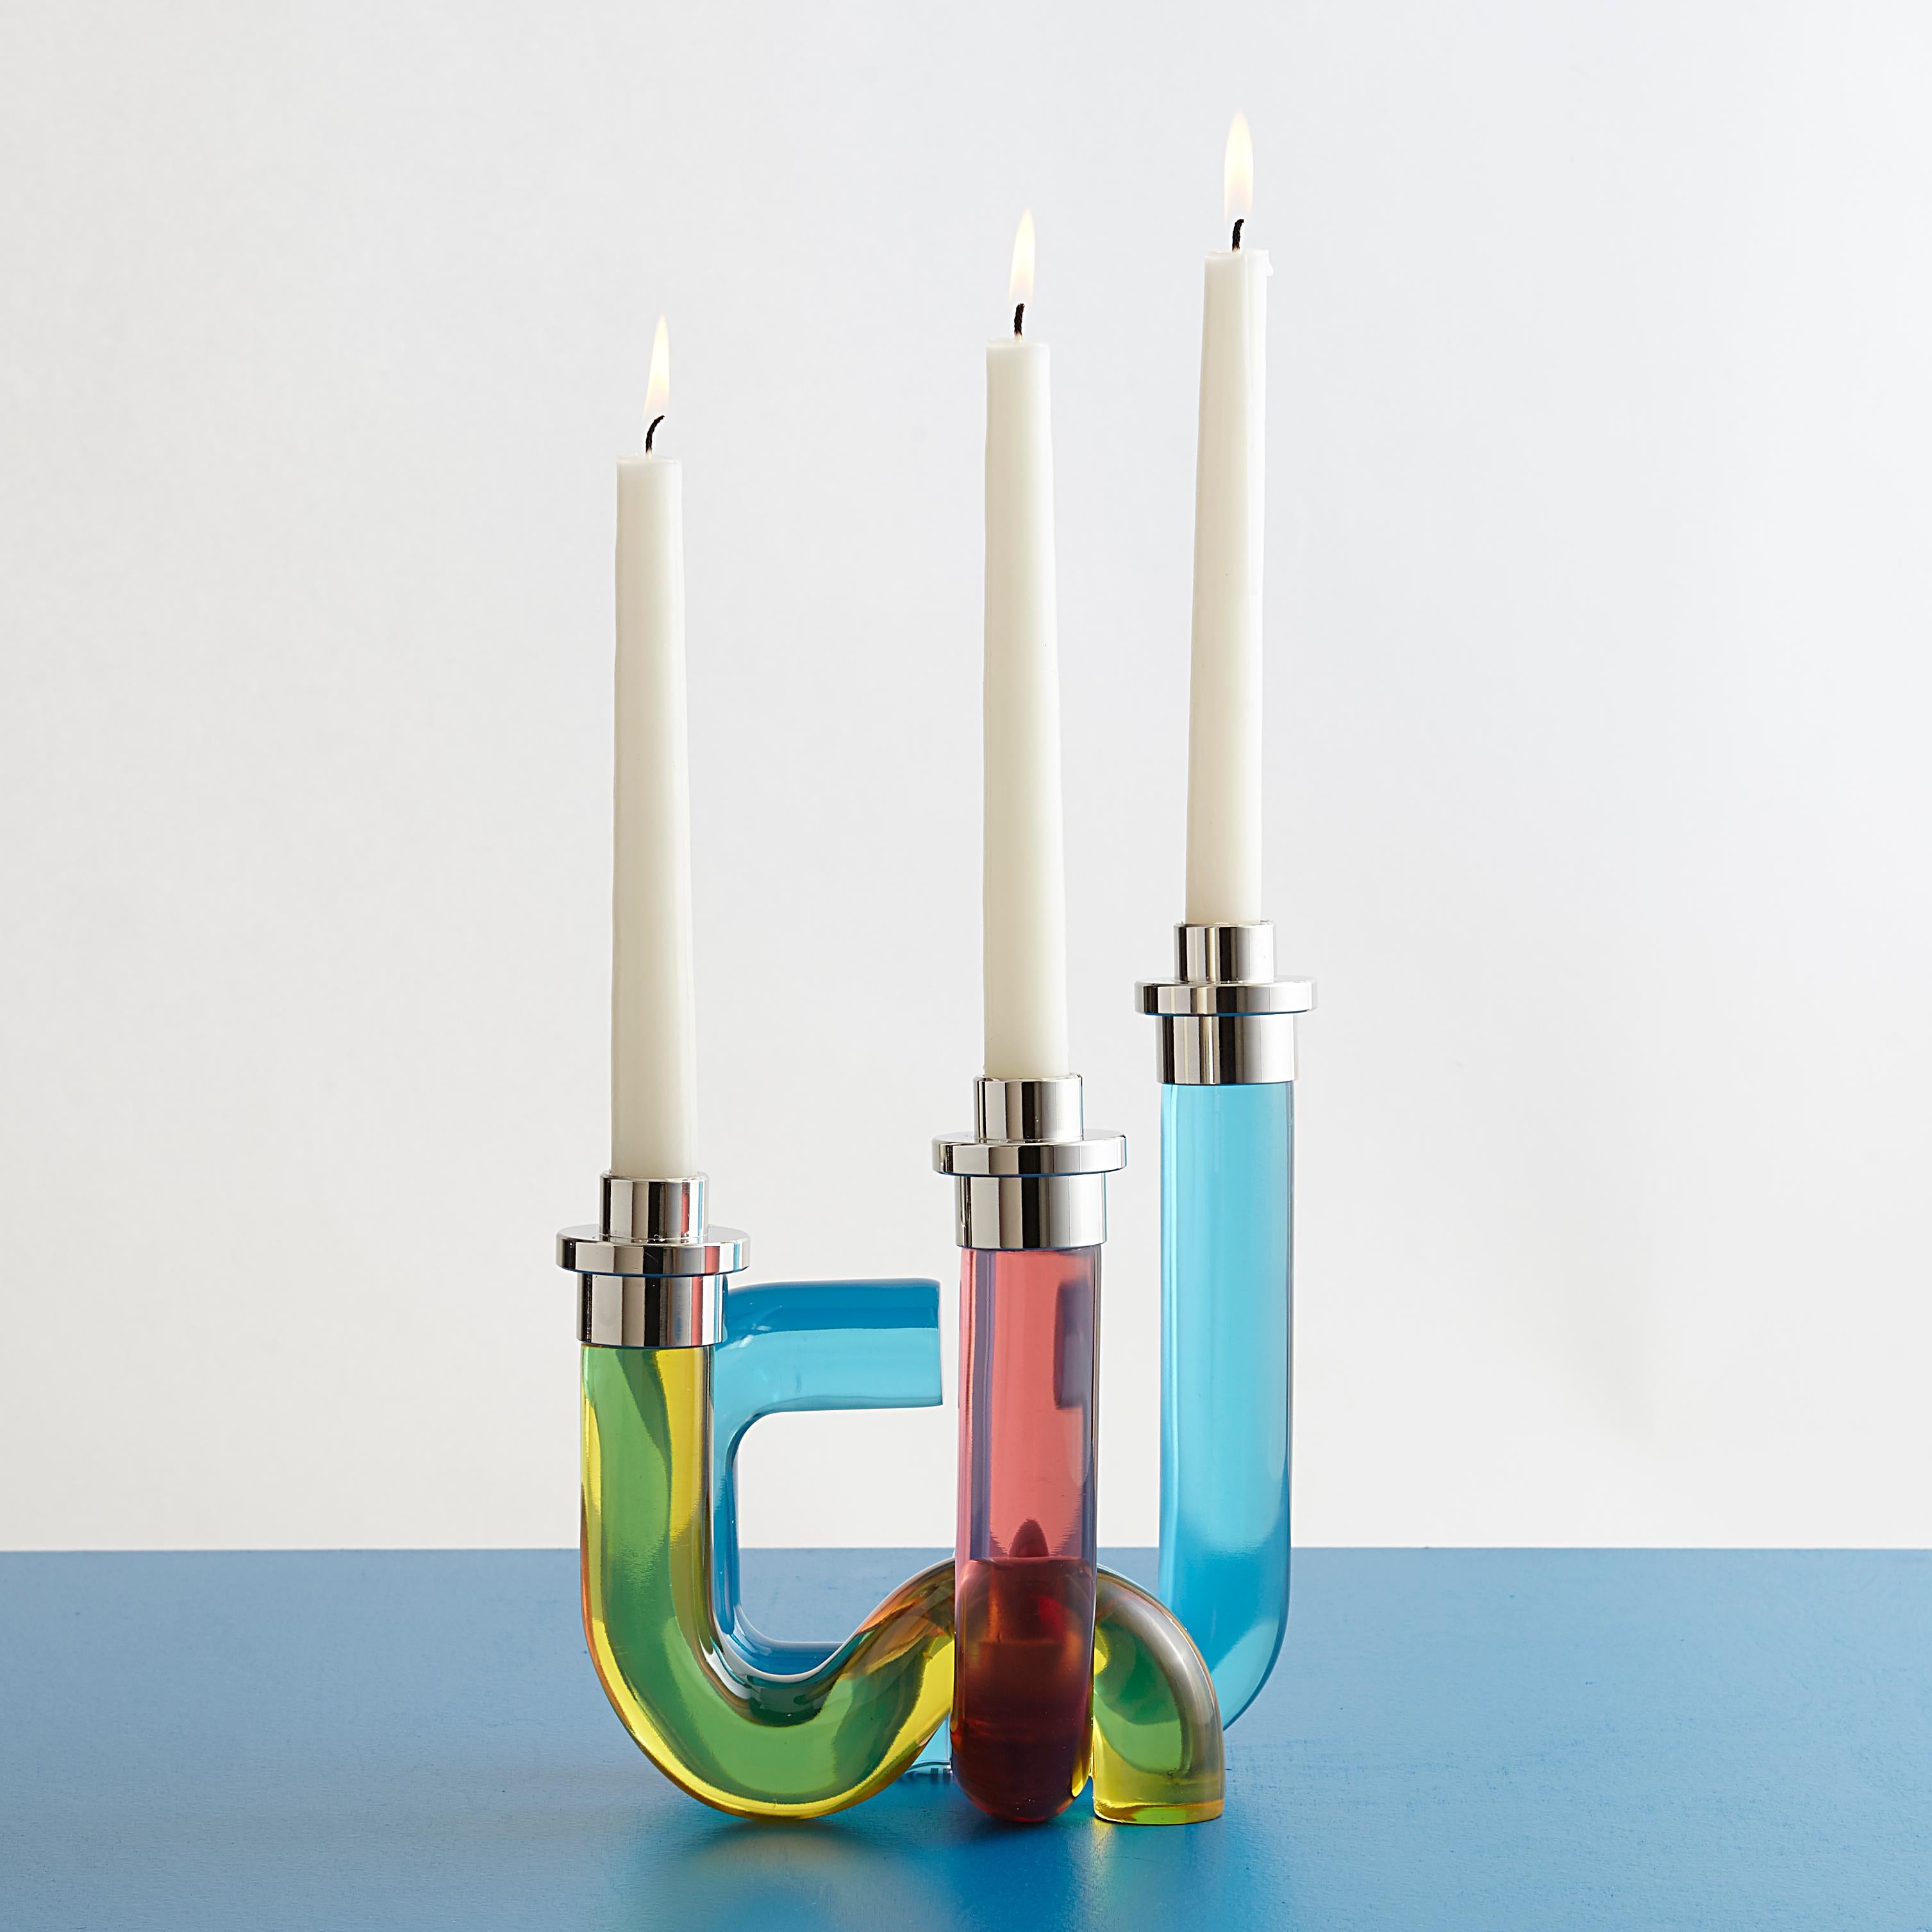 Pipe Up. Our Pompidou Candleholders pair 70s-inspired patterns with daring dimension for added ooomph. Featuring solid acrylic pipes fused together and accented with polished nickel. A bold primary colorway creates a modern glow to match any mood.